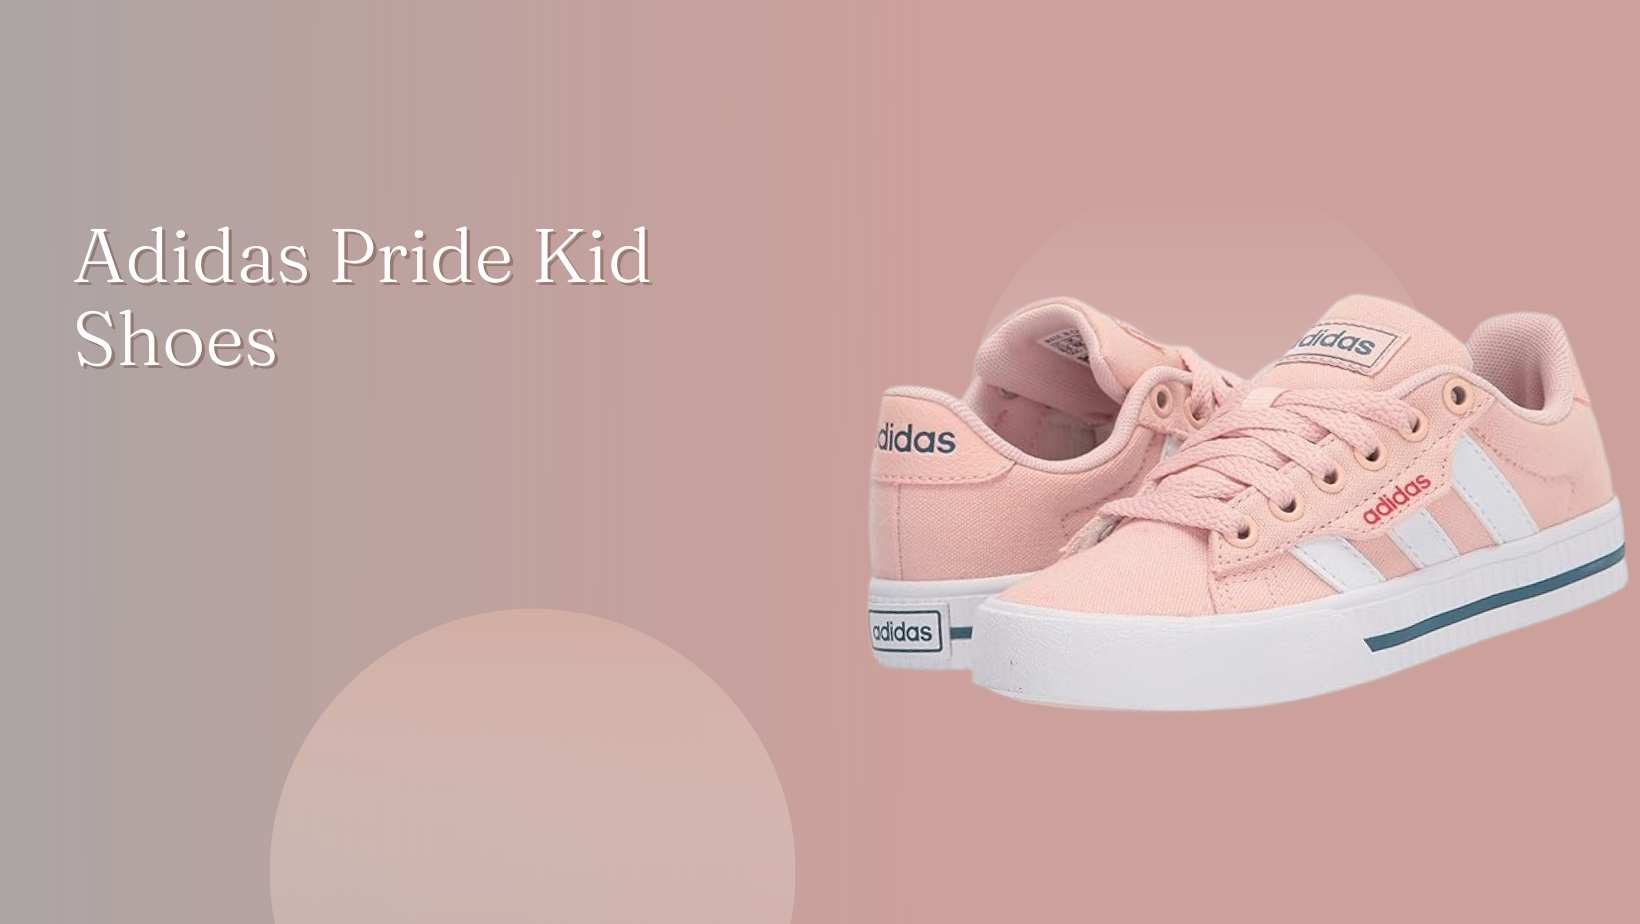 Adidas Pride Kid Shoes: Stylish Comfort for Your Little Ones